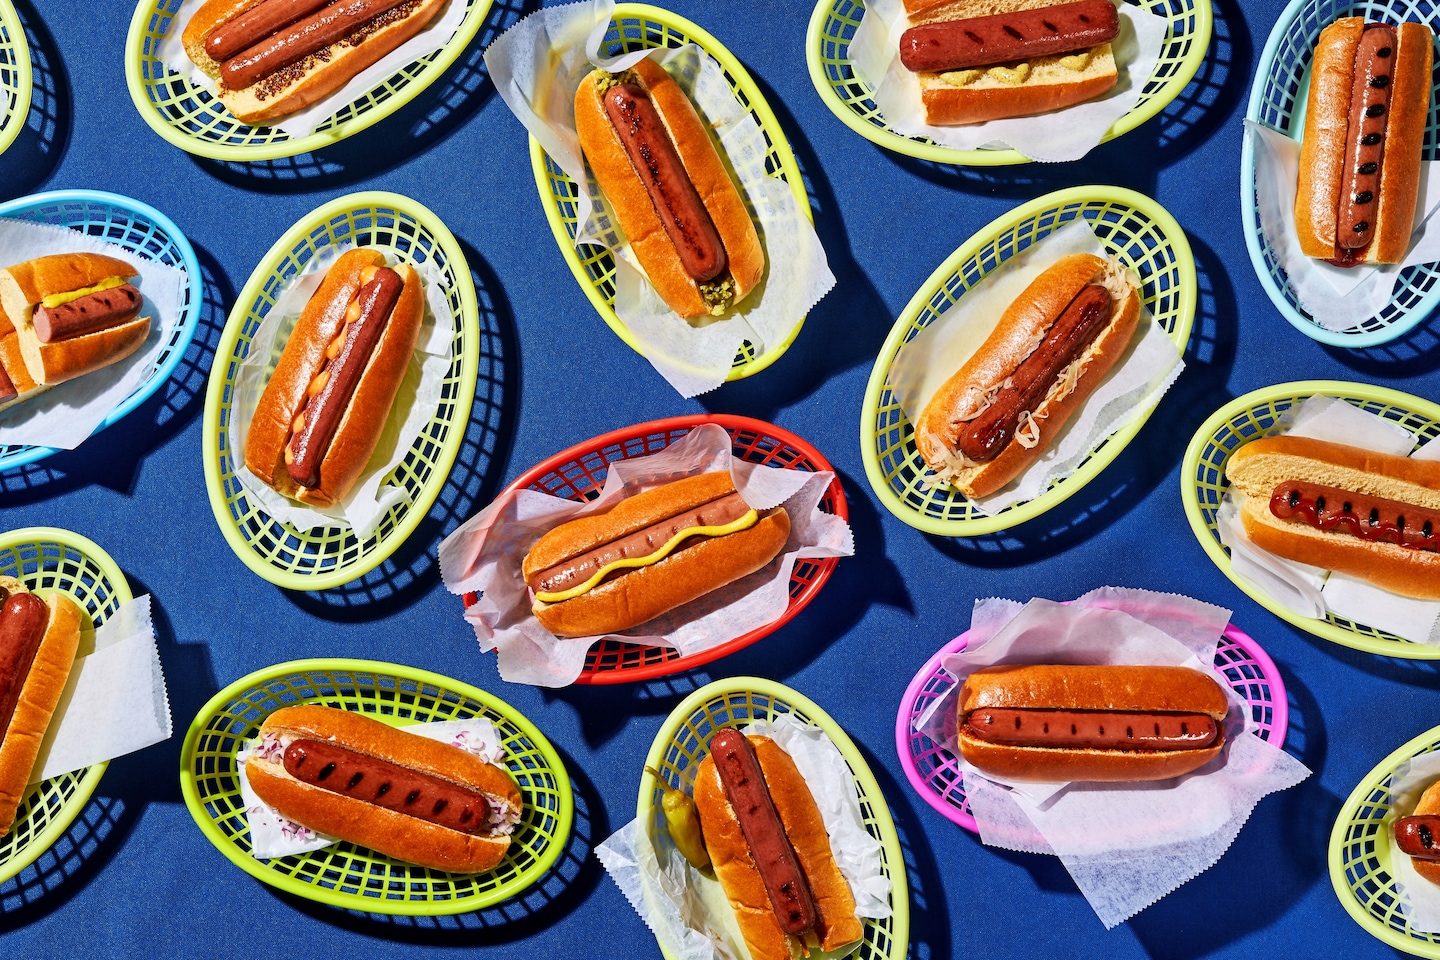 Best hot dogs in America: We tested 15 popular brands